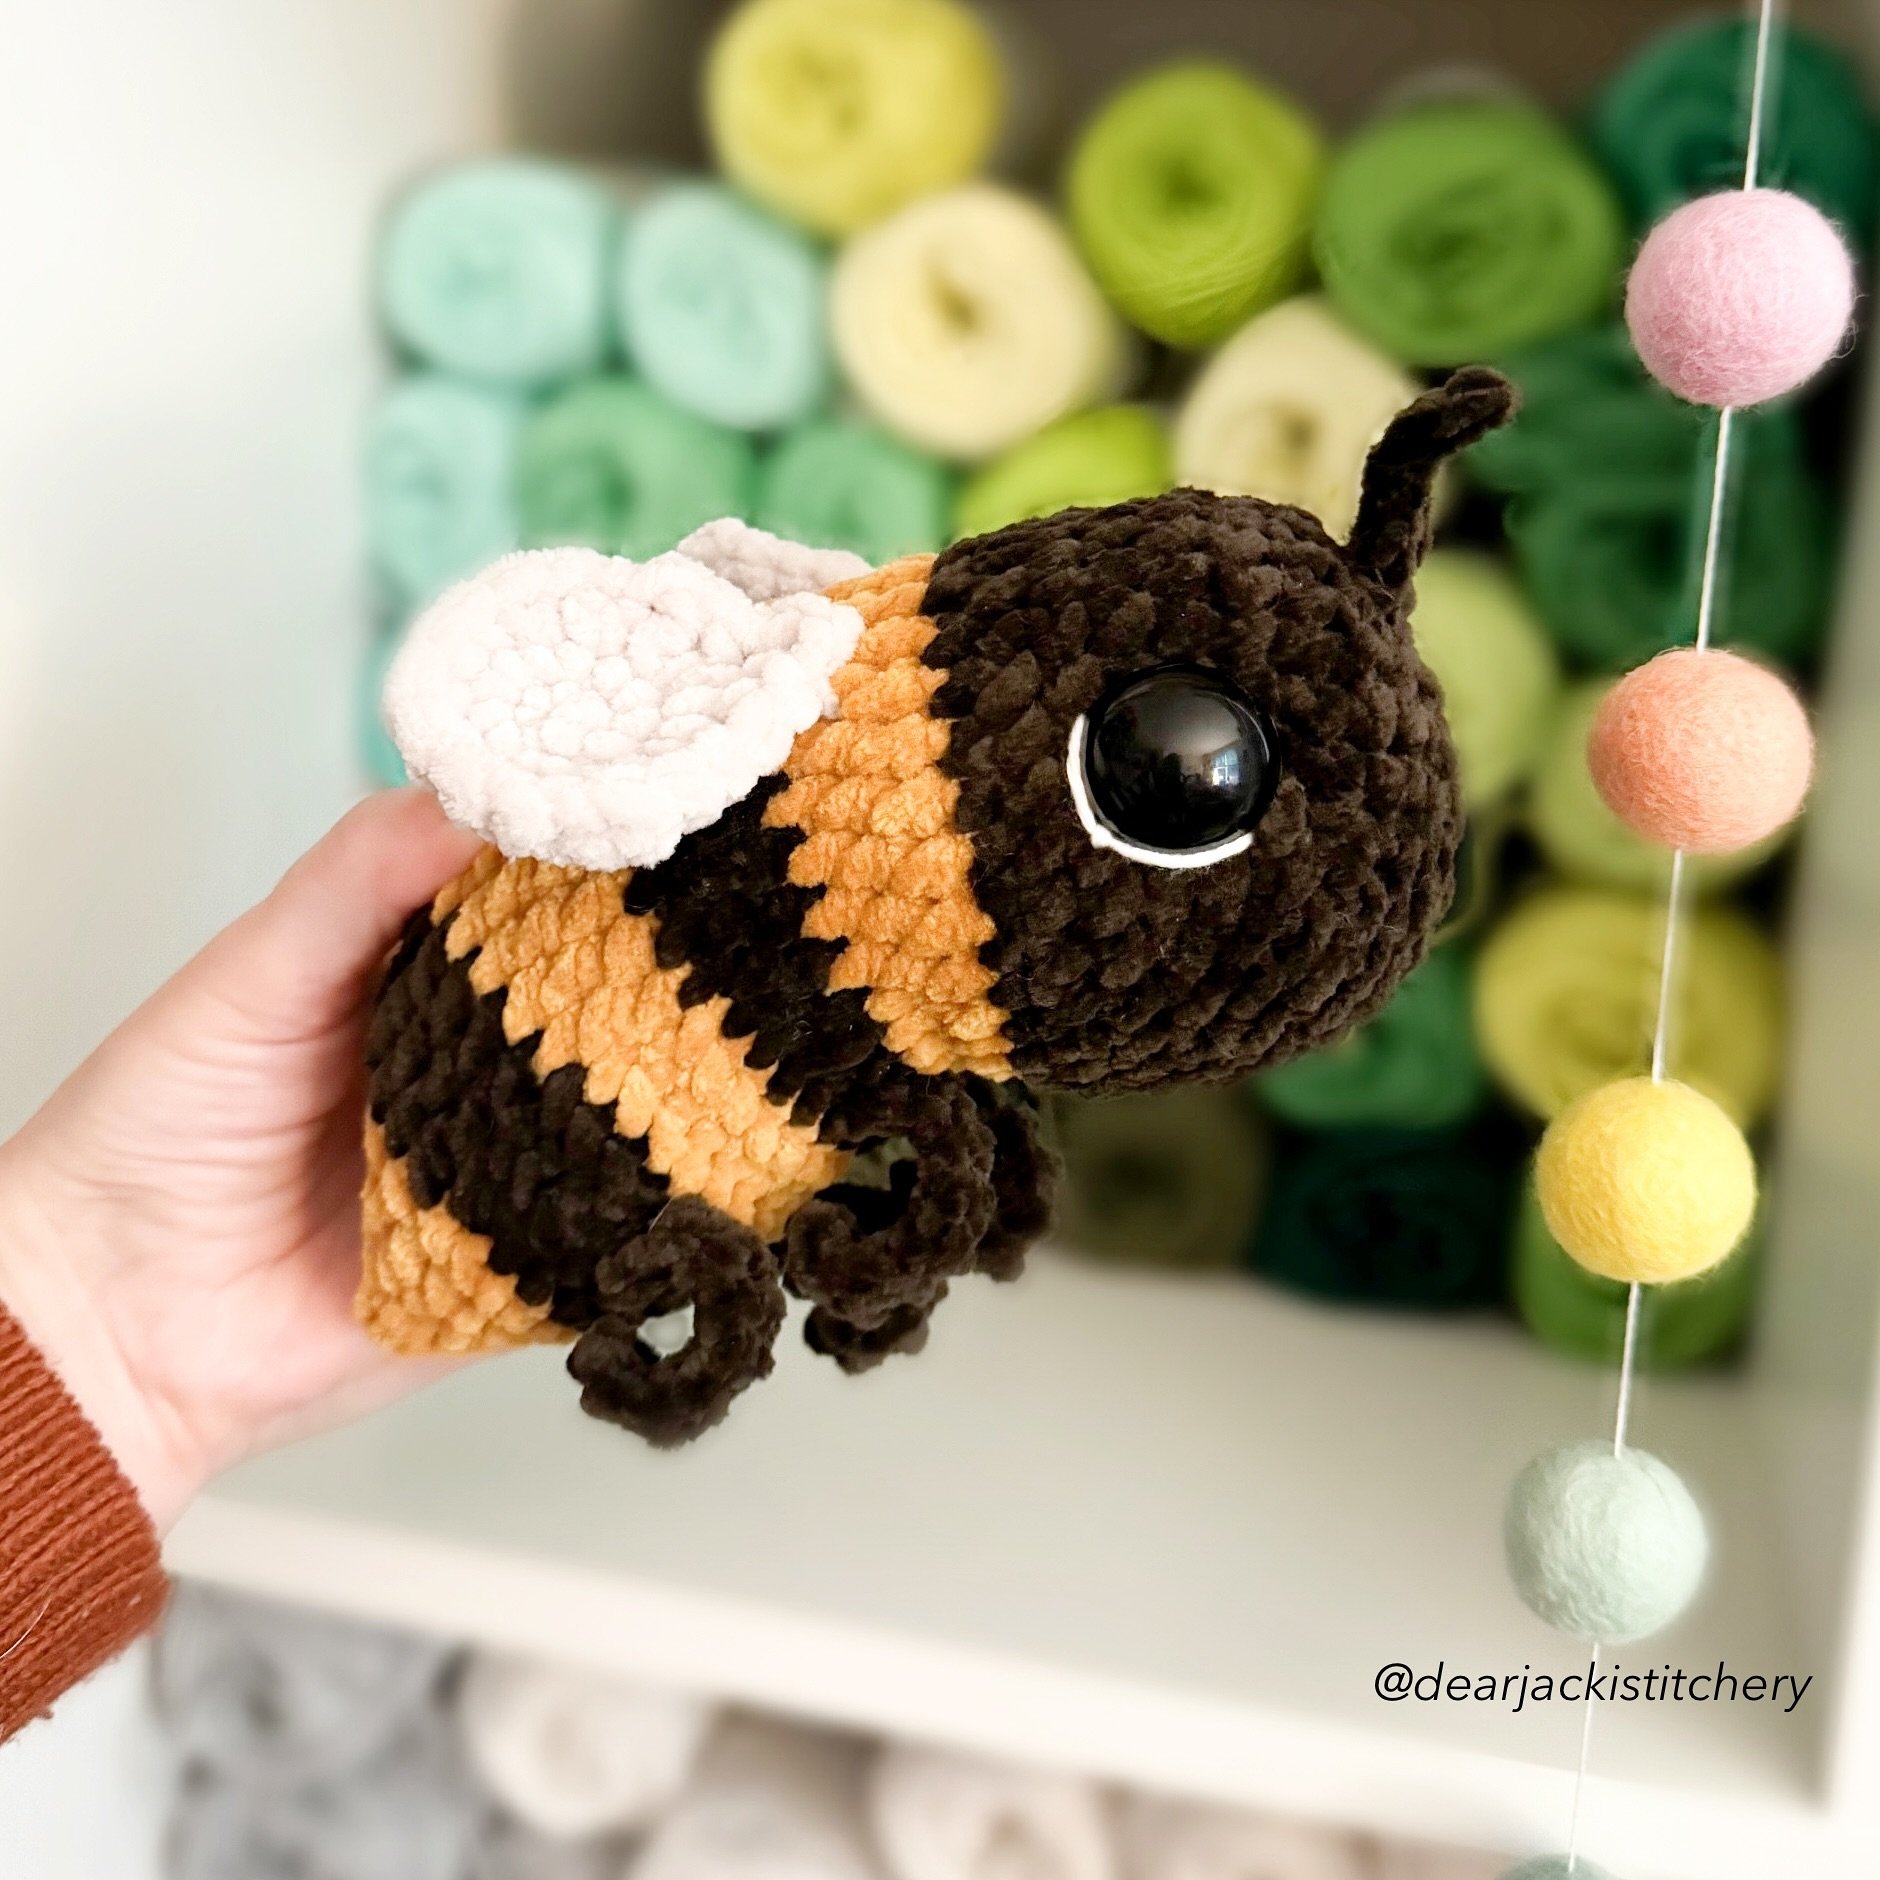 It&rsquo;s #amigurumaday2 and I made it! This is the last amigurumi I made and it&rsquo;s a new pattern, coming soon! A curious Bumble Bee plushie design. 

This was a challenge for me as there are a BILLION 🐝 out there. So, I am hoping I pulled it 